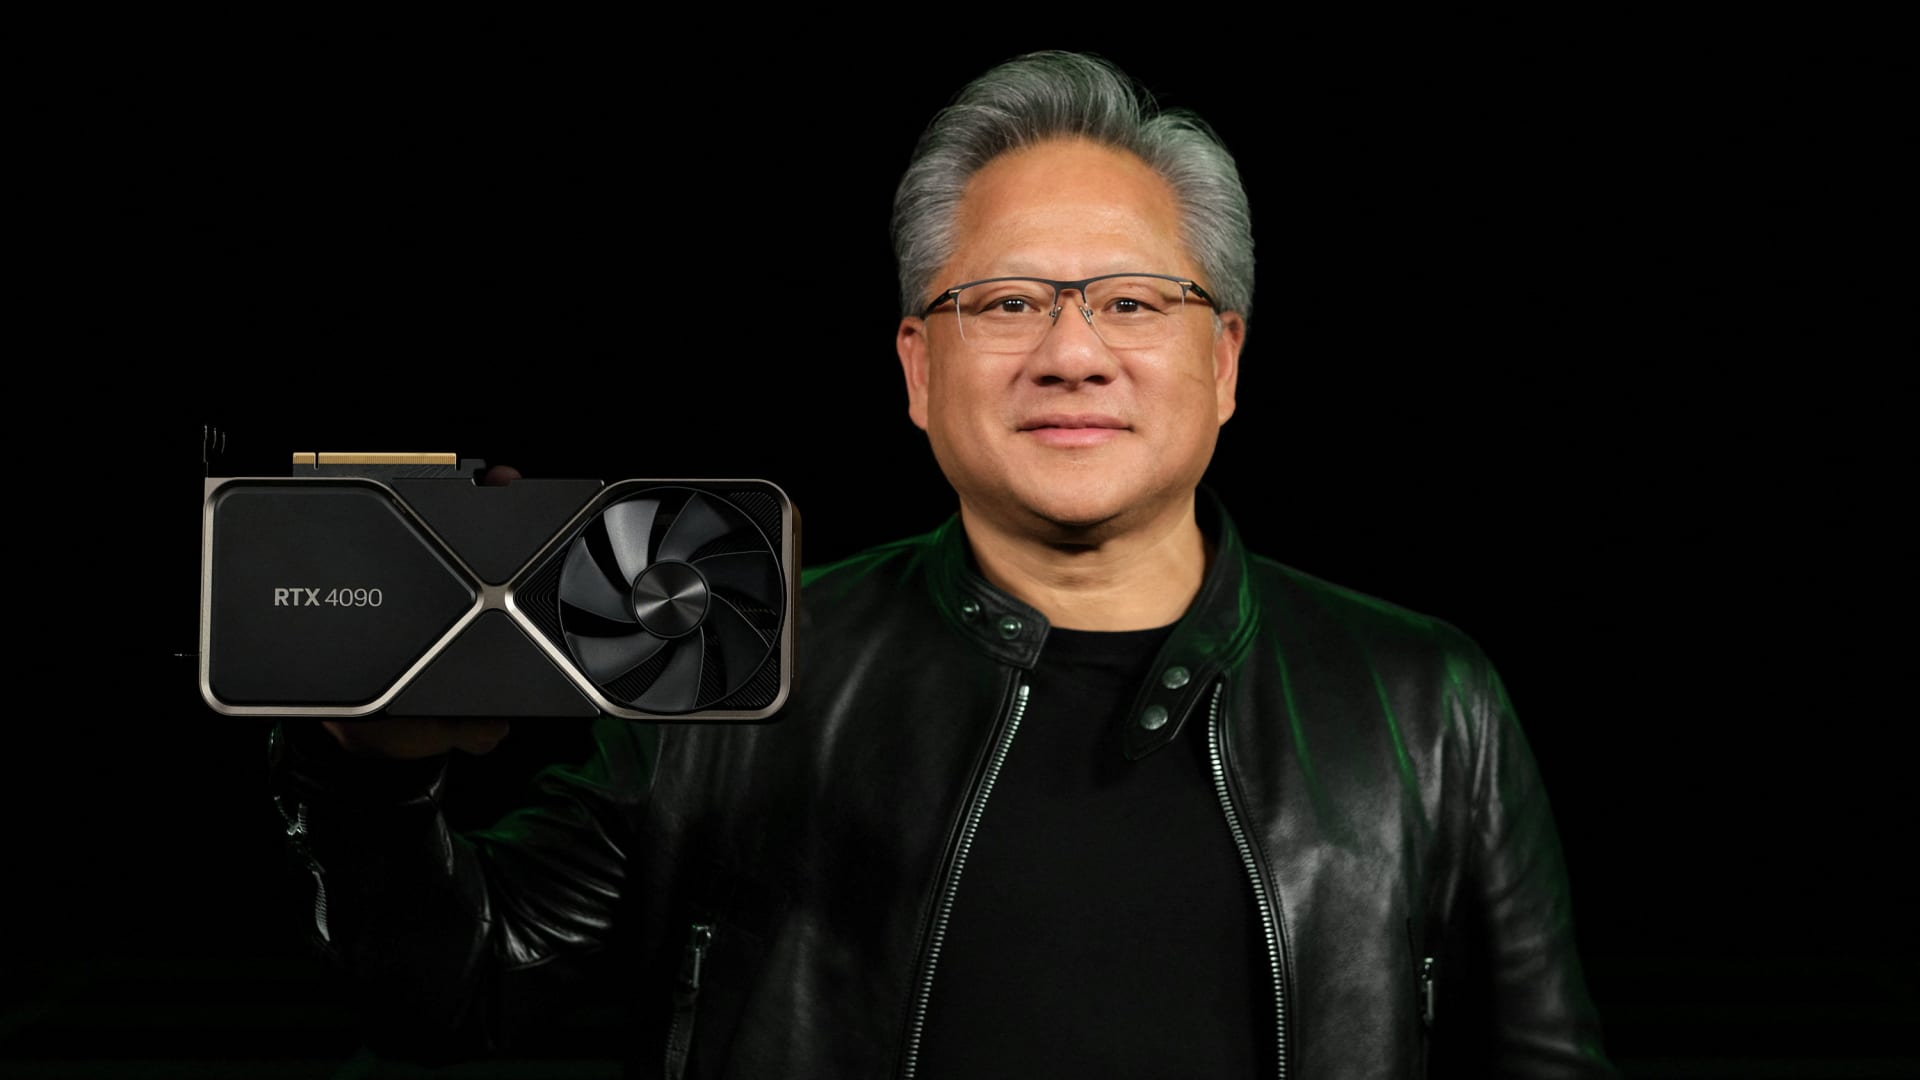 Nvidia to launch slower version of its gaming chip in China to comply with U.S. export controls